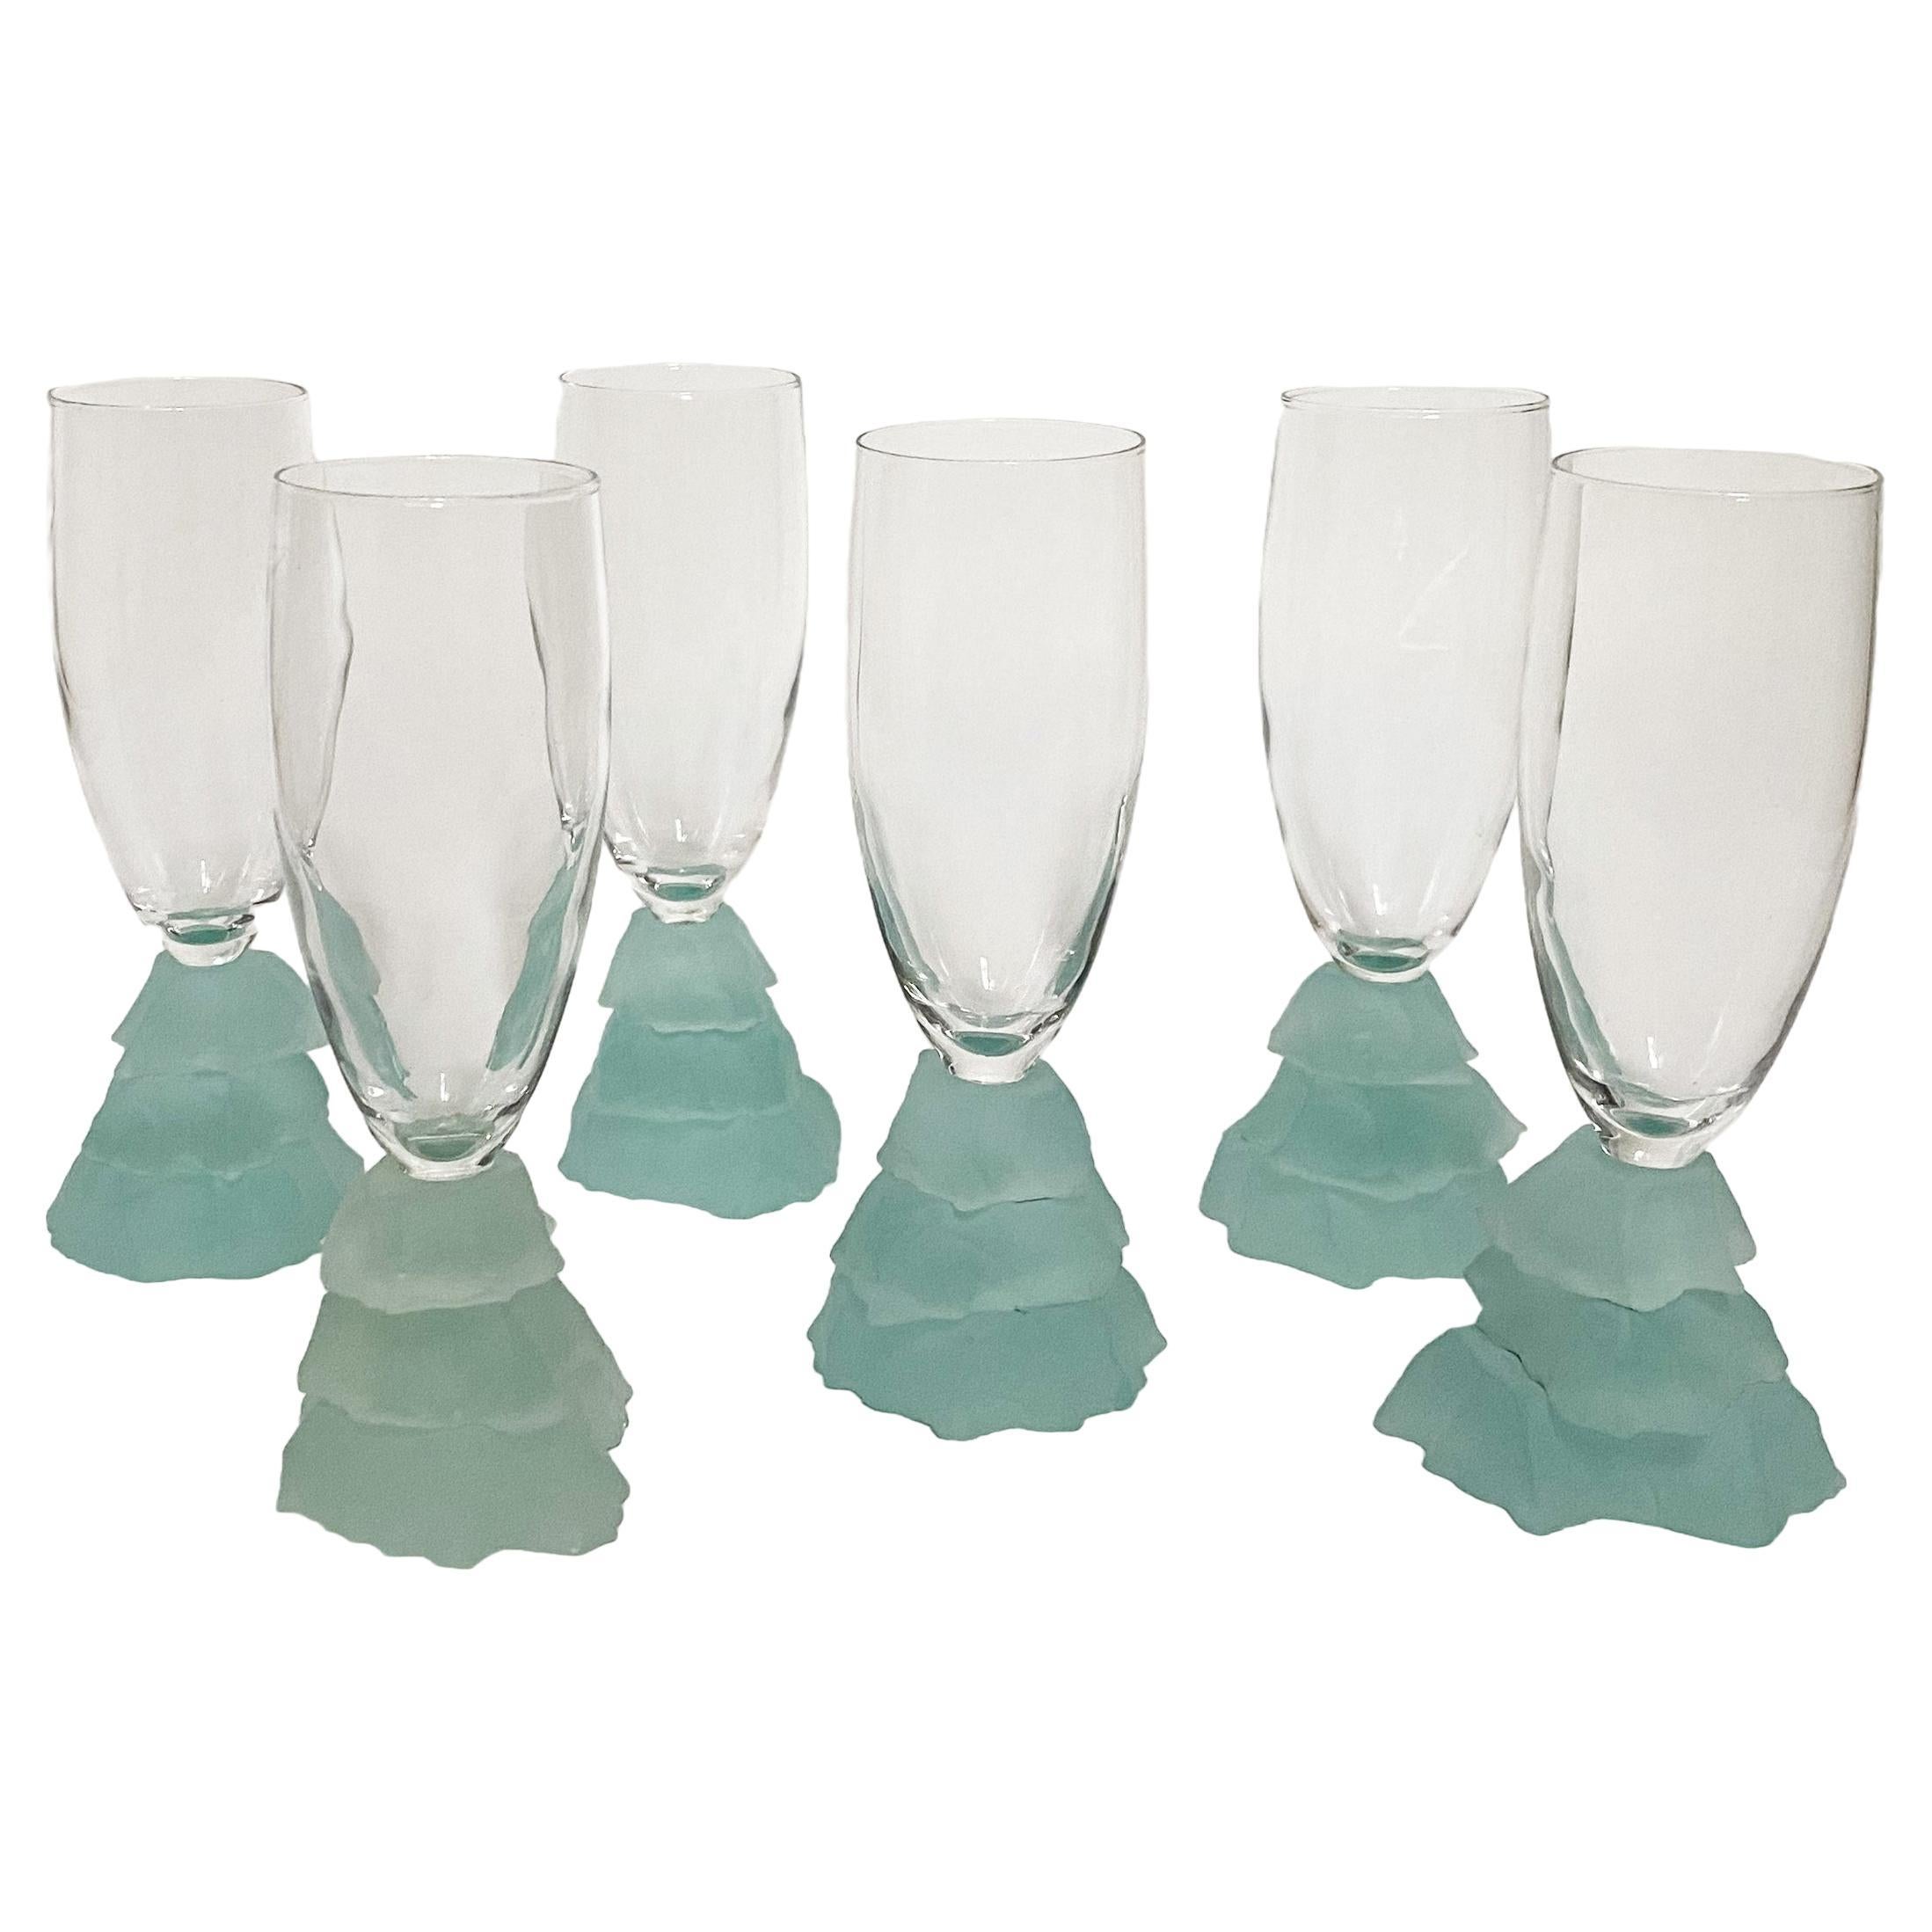 Set of Postmodern "Iceberg" Champagne Flutes Glasses in the Style of Daum, 1980s